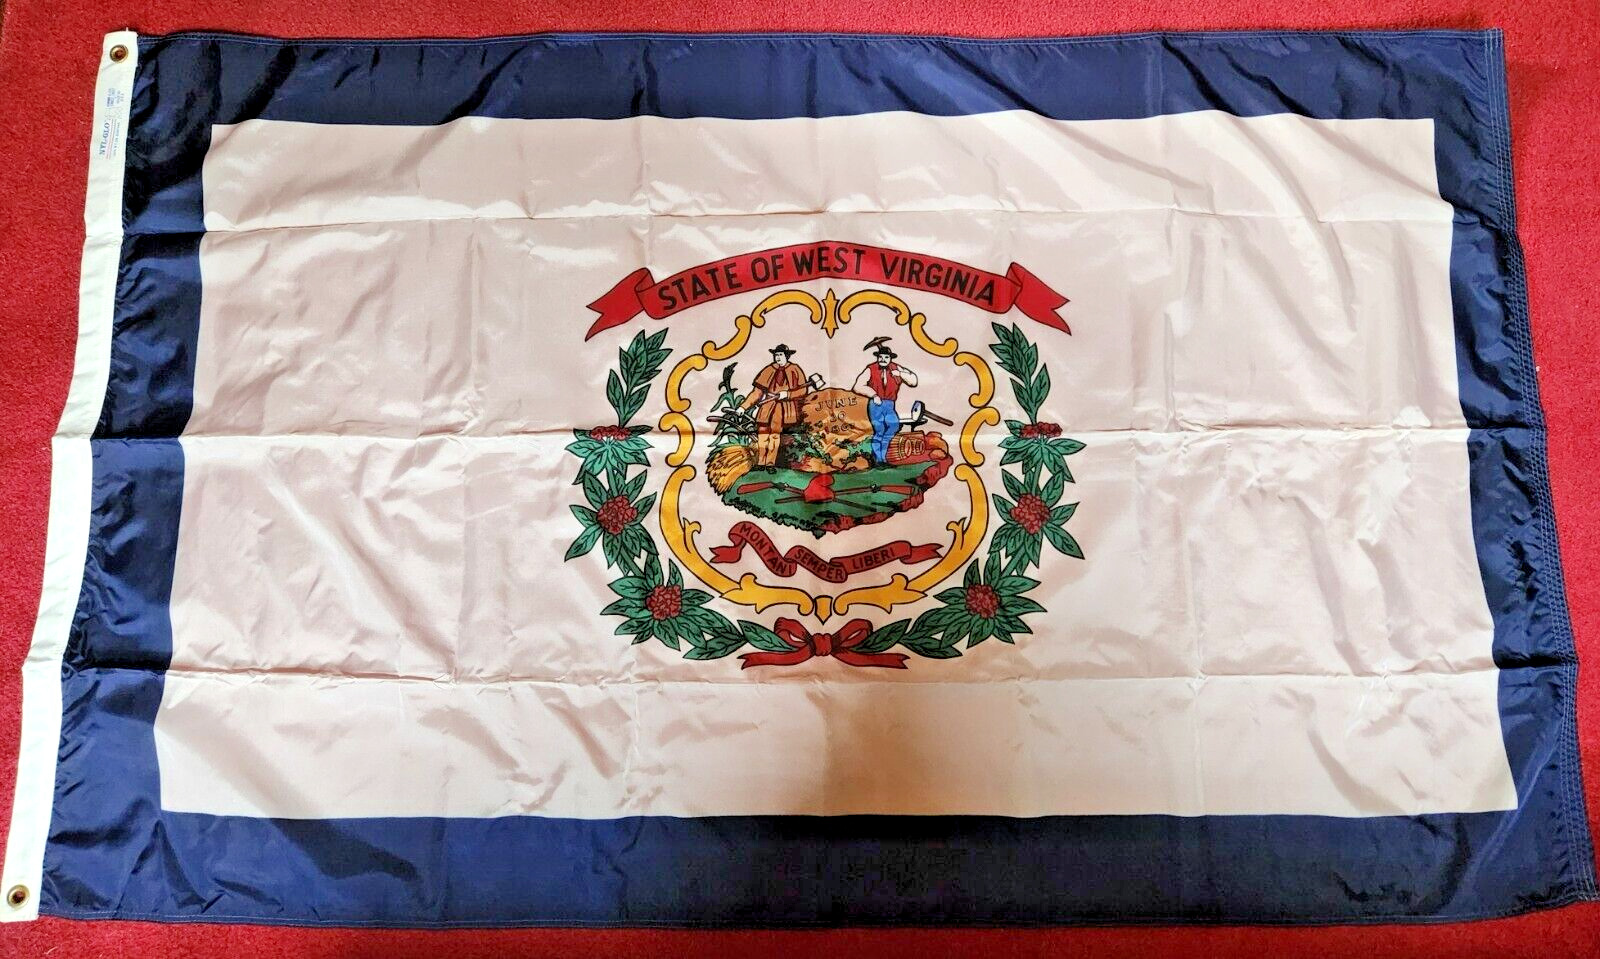 WEST VIRGINIA State Flag 3x5 145860, Vintage 90s, Preowned but New in Box